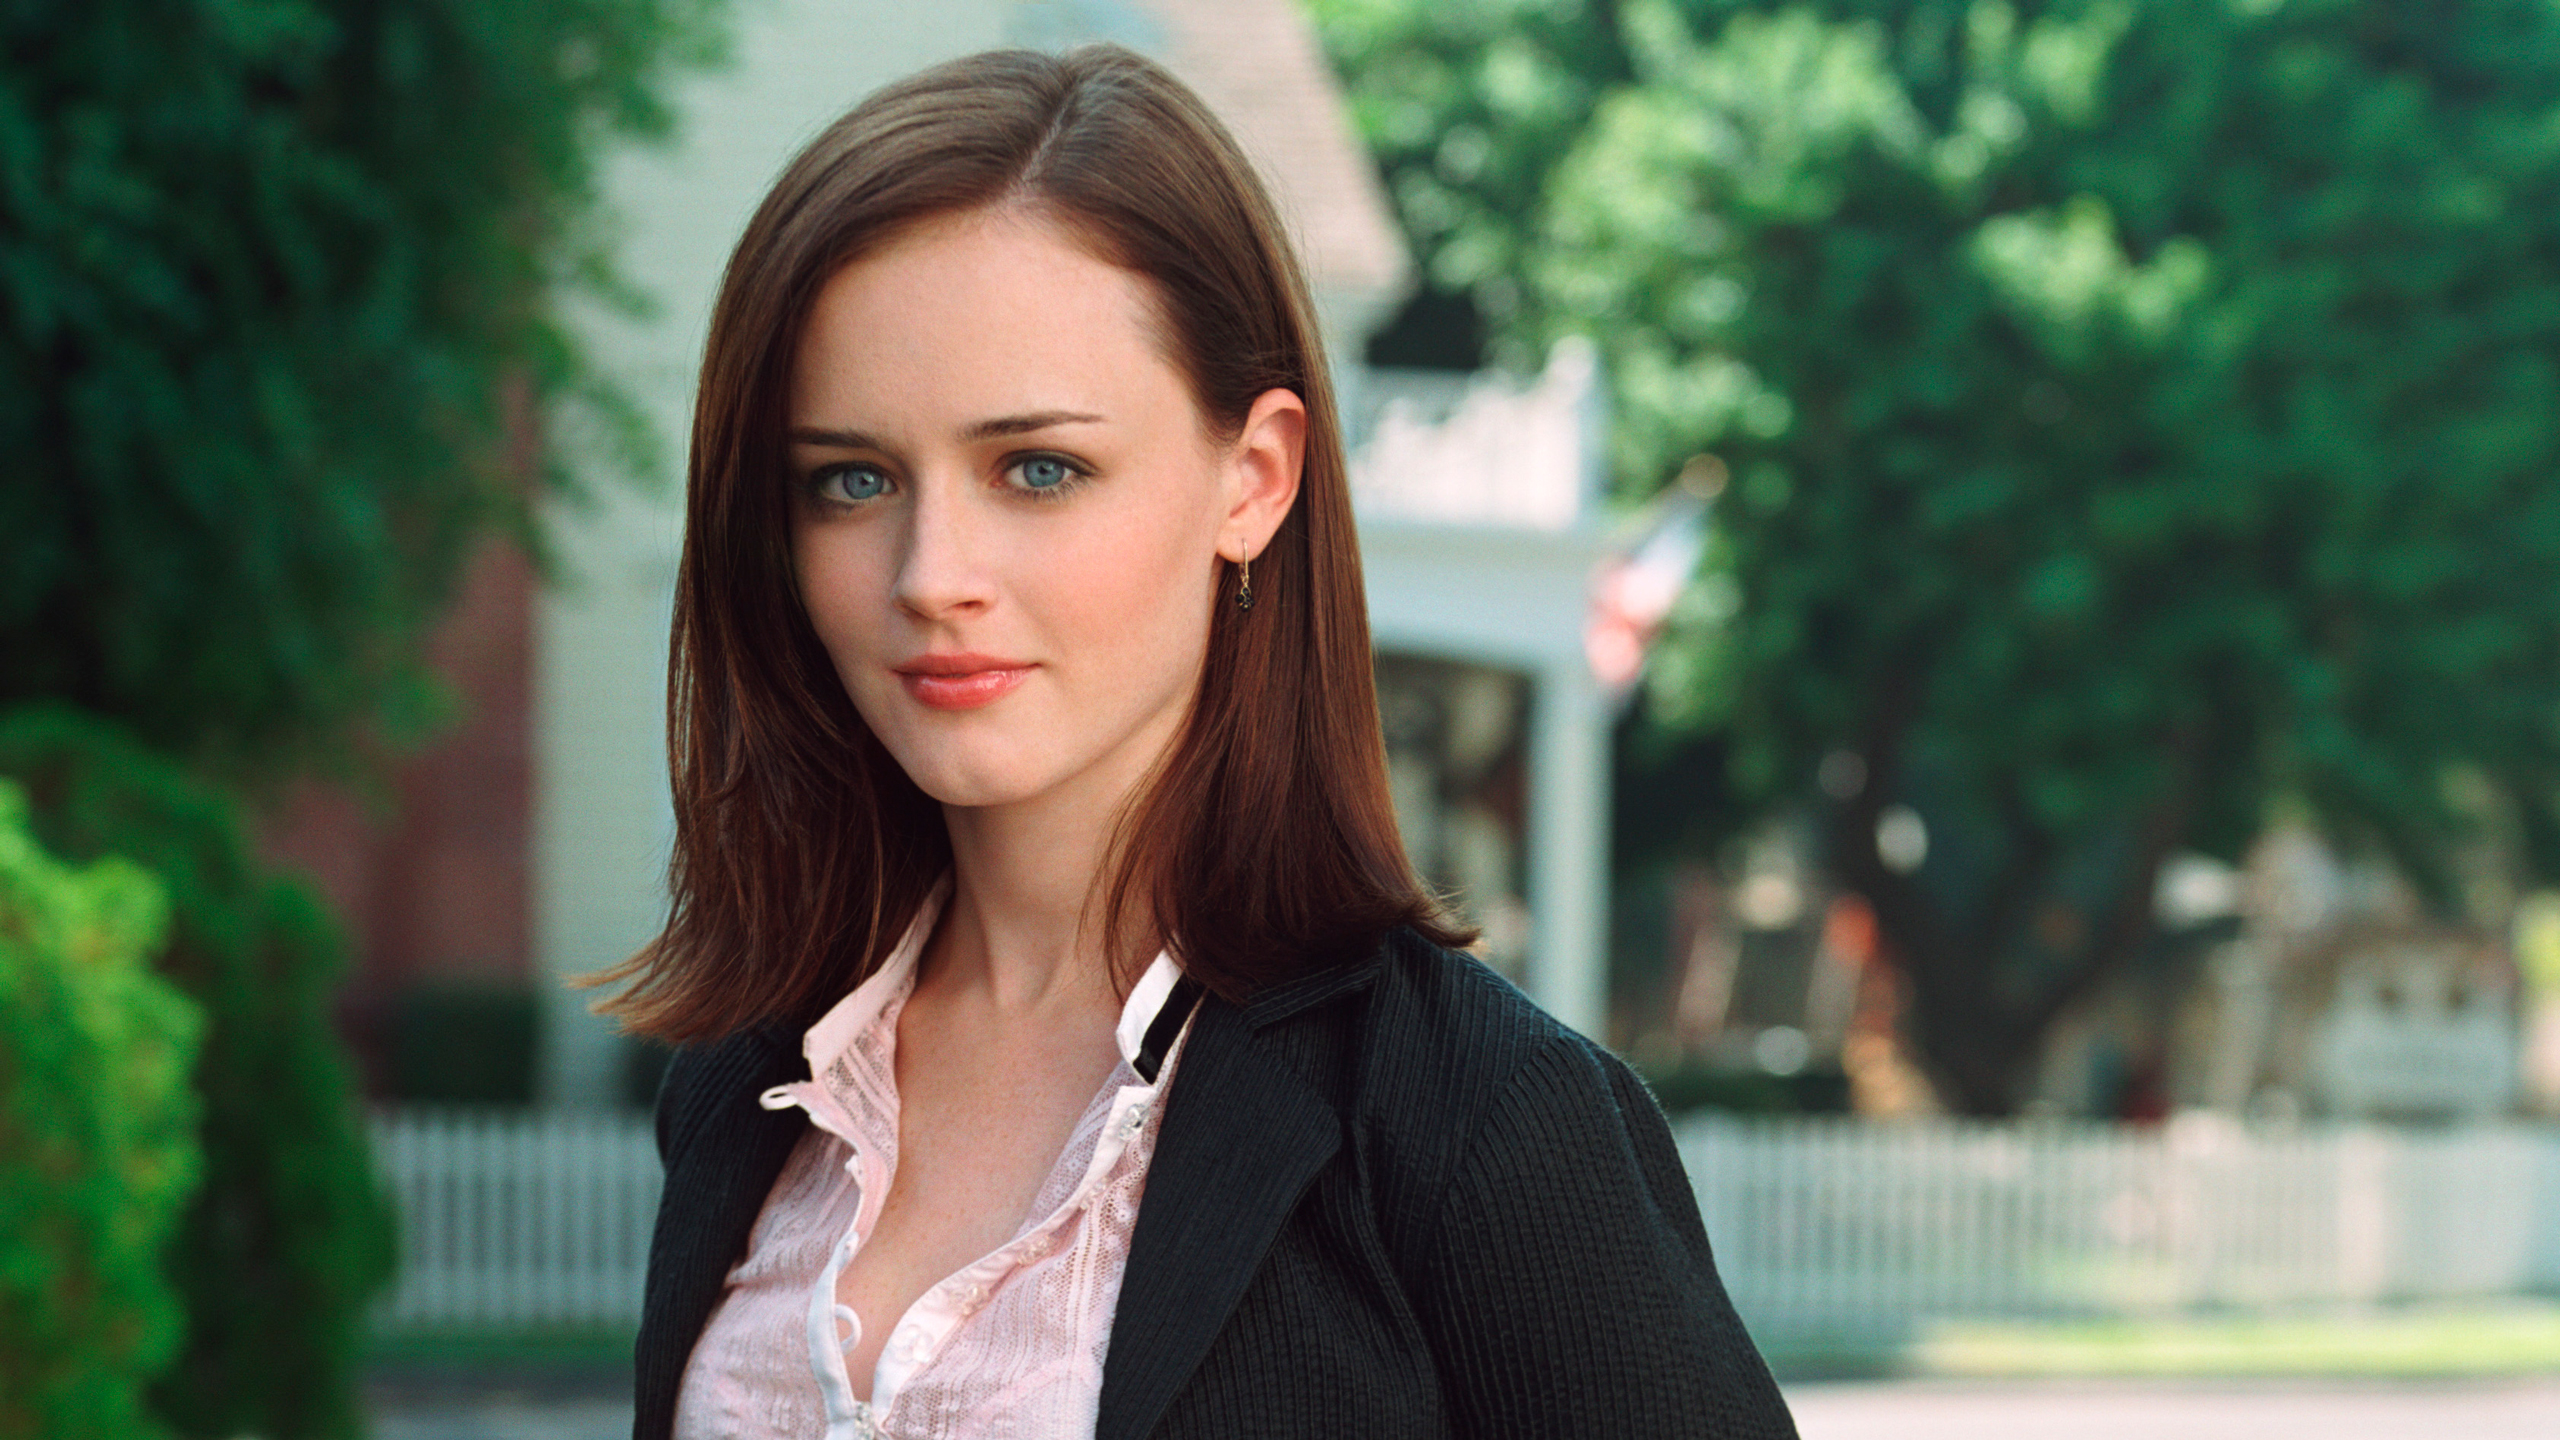 Rory Gilmore, Gilmore Girls was entitled and self-centered. 